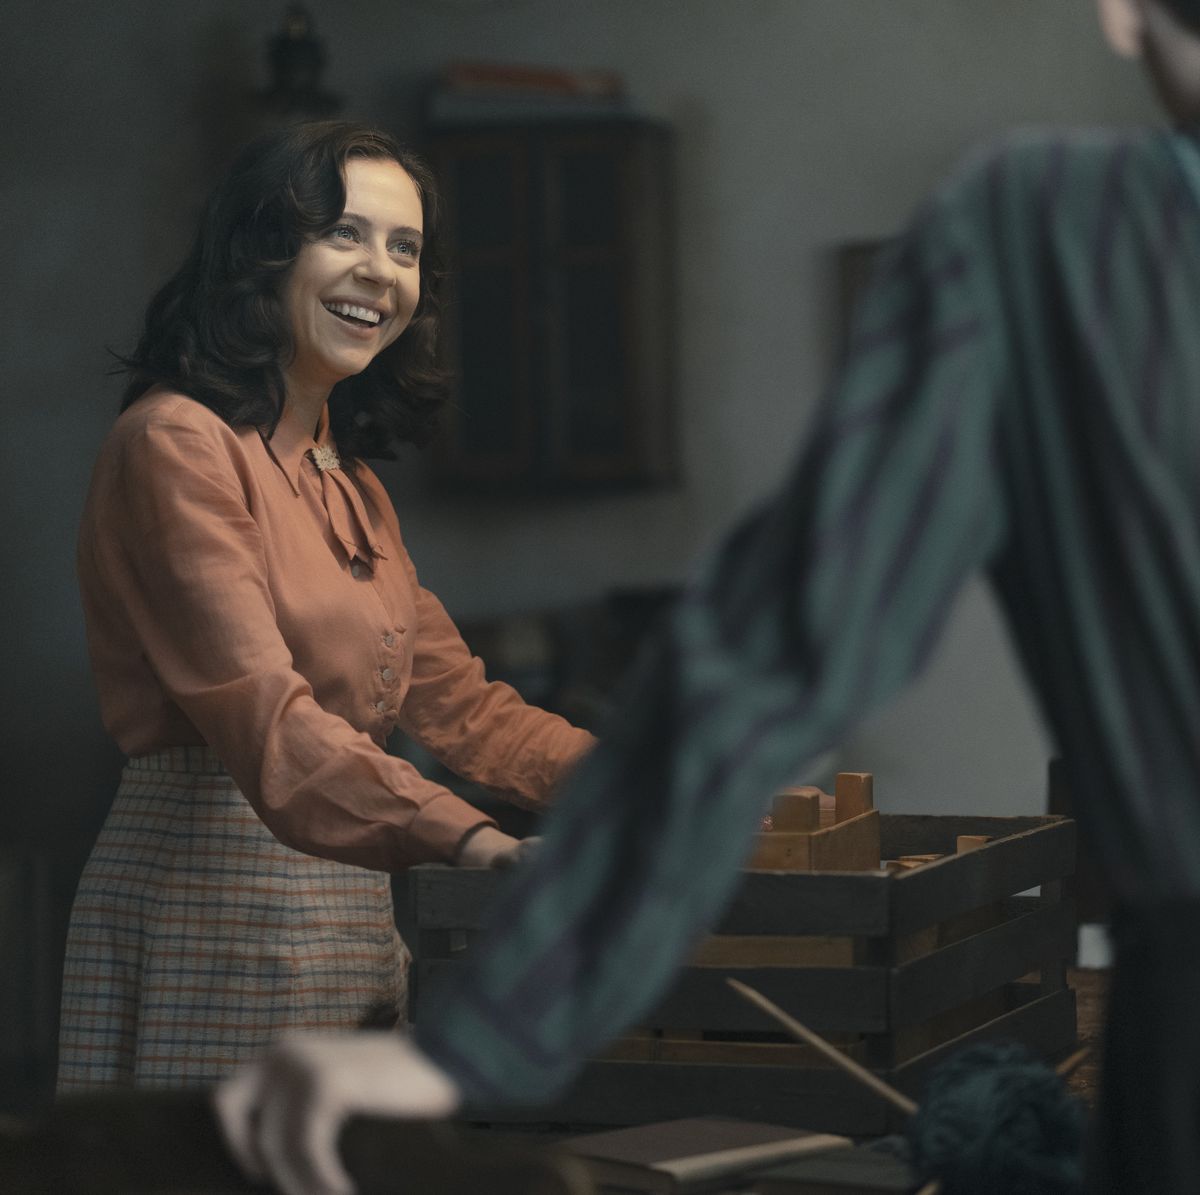 miep gies, played by bel powley, delivers a surprise of fresh strawberries to the annex as seen in a small light credit national geographic for disneymartin mlaka